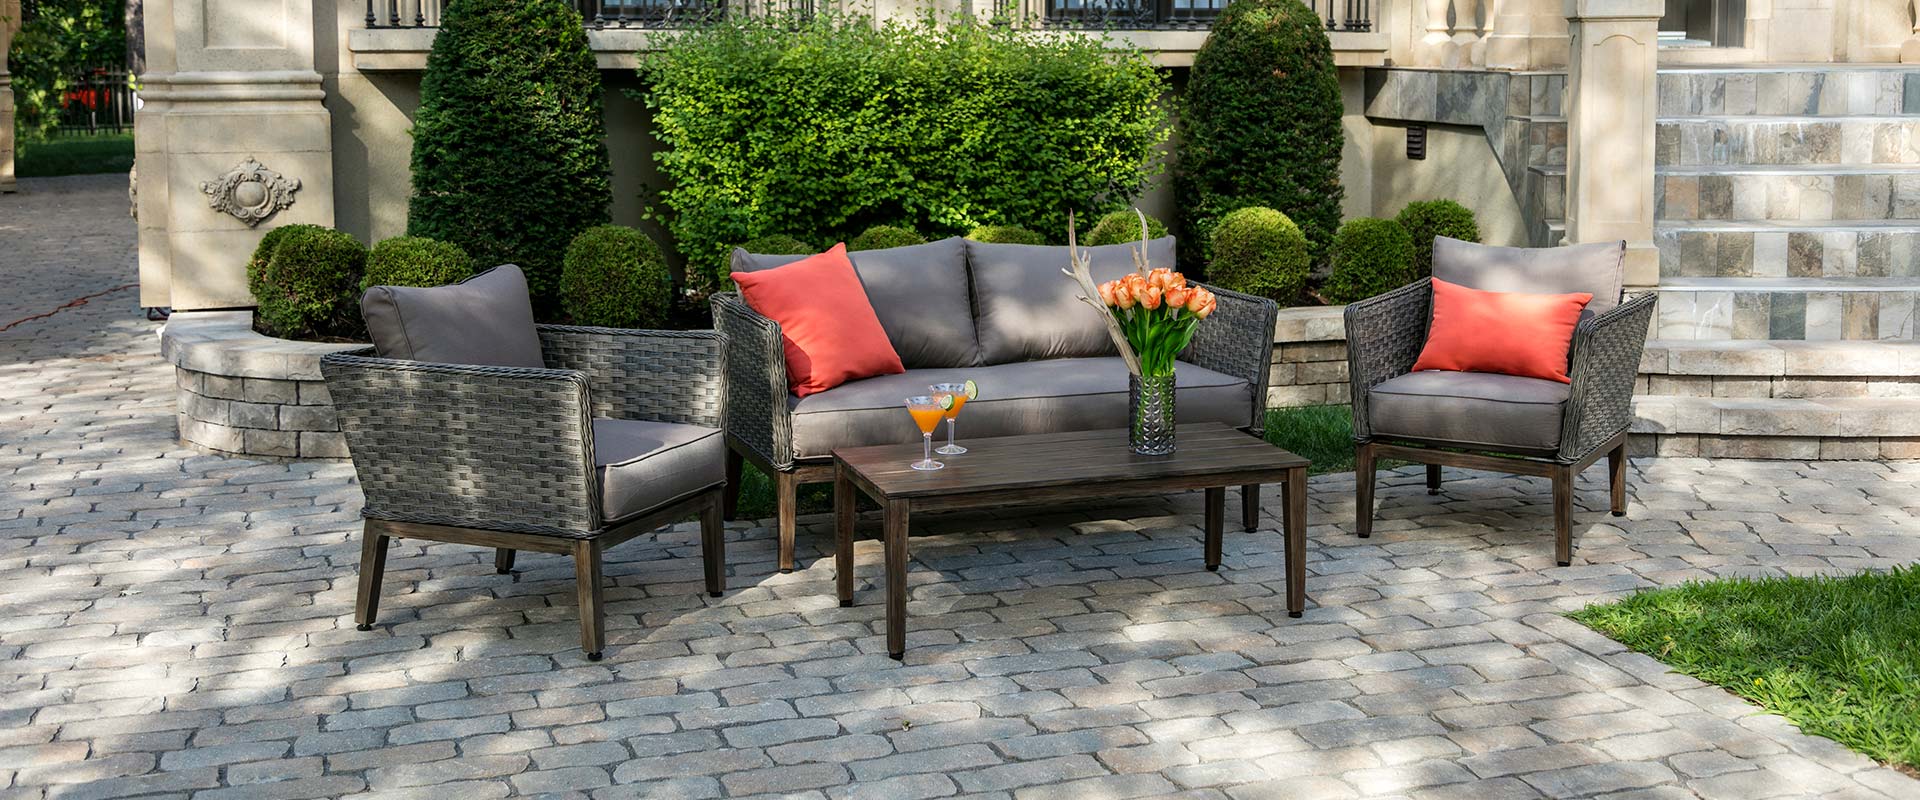 Patio Furniture S And Outdoor, Patio Furniture Barrie Ontario